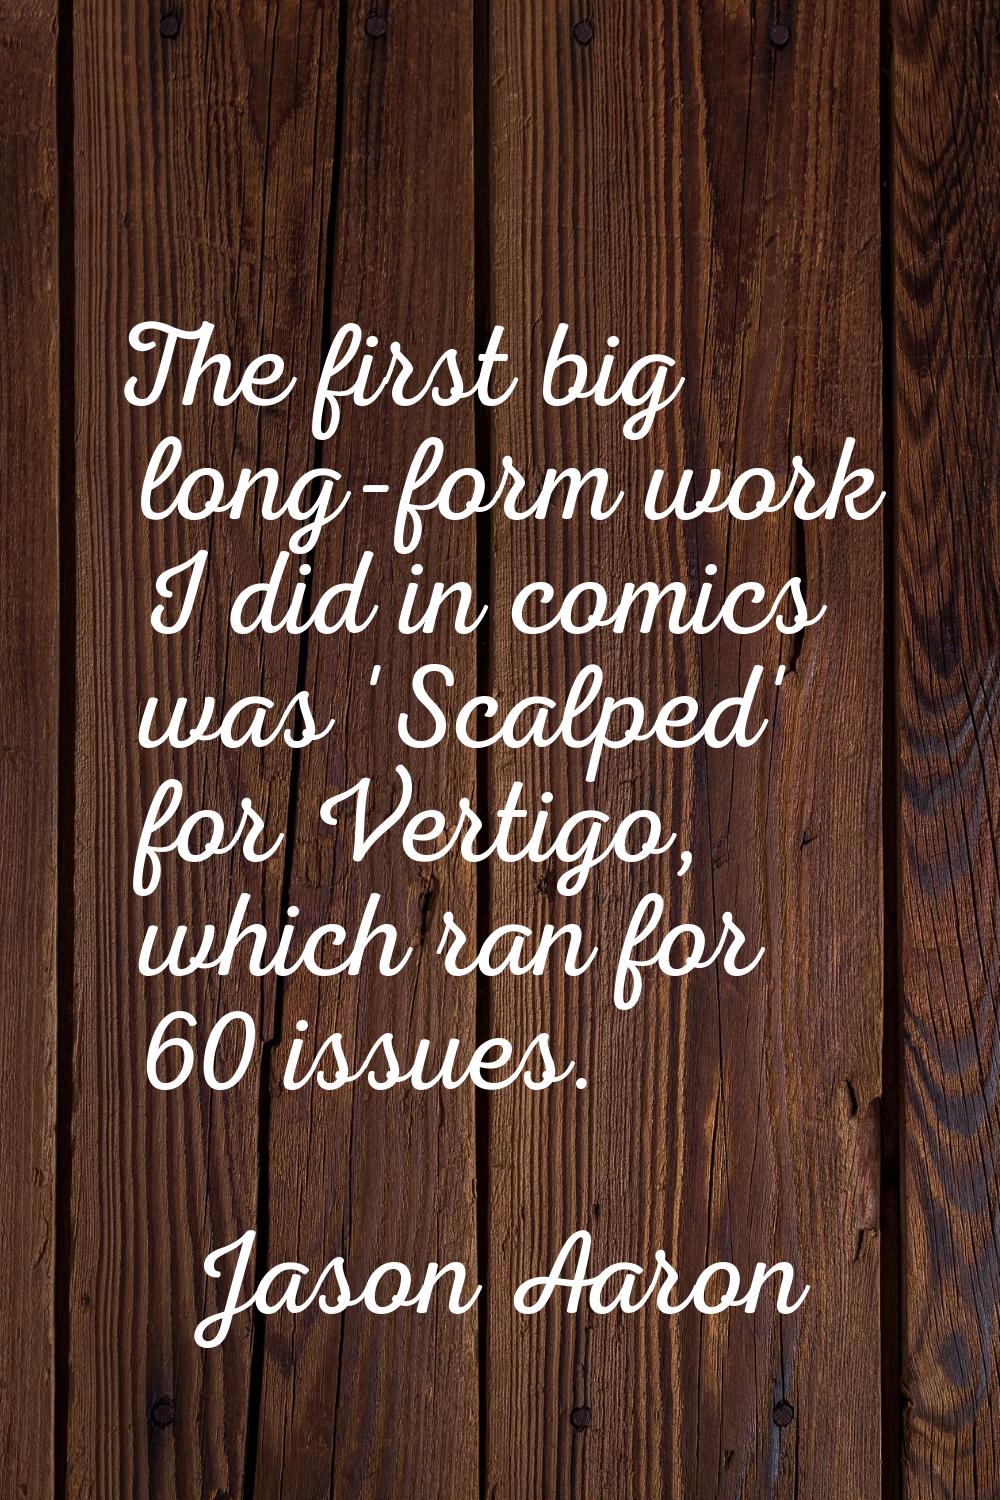 The first big long-form work I did in comics was 'Scalped' for Vertigo, which ran for 60 issues.